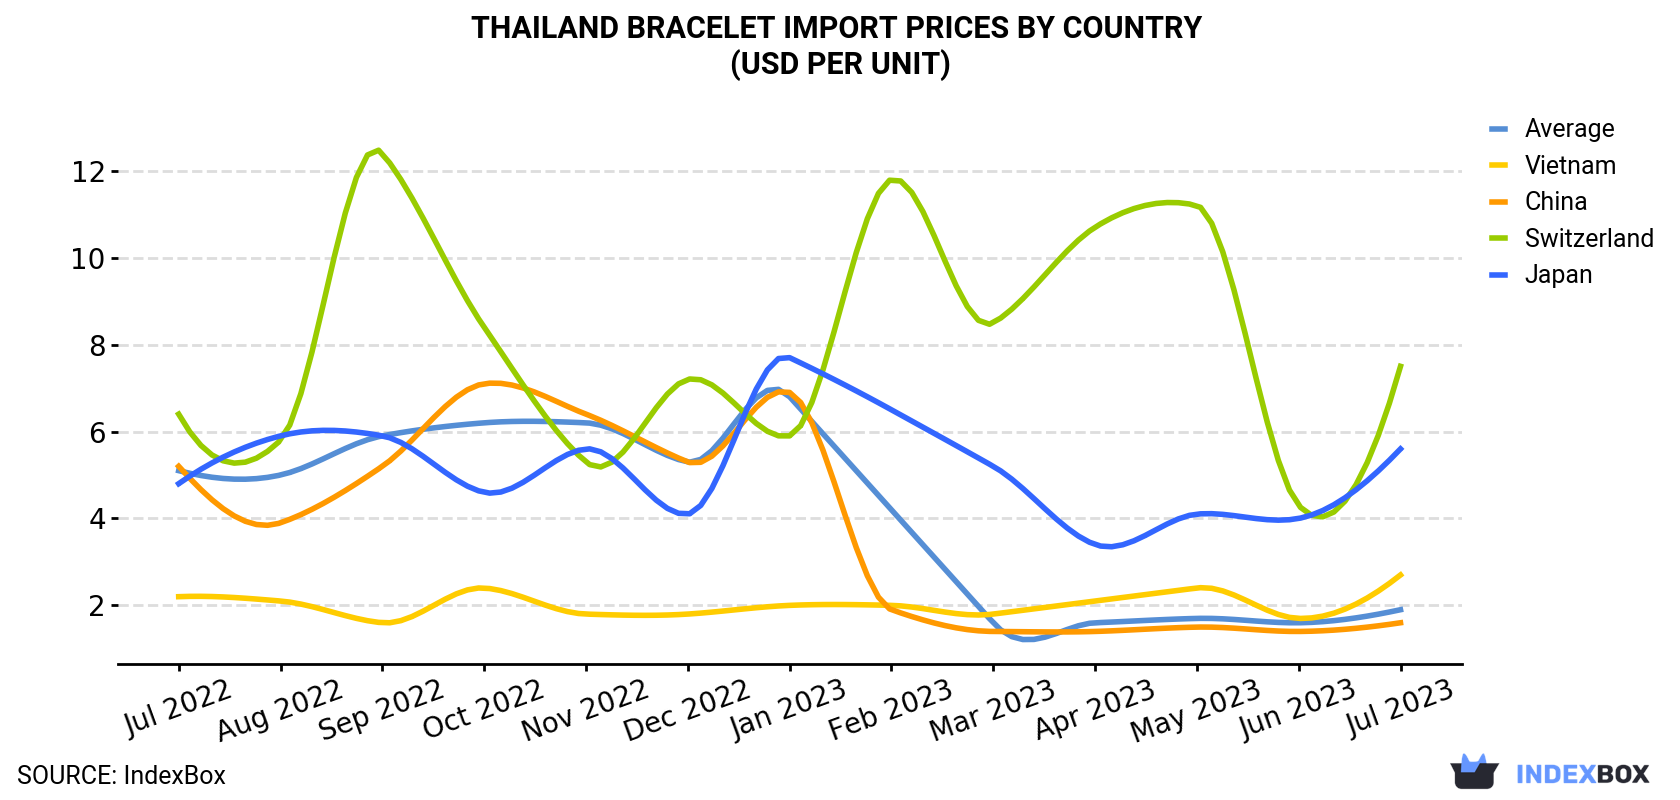 Thailand Bracelet Import Prices By Country (USD Per Unit)